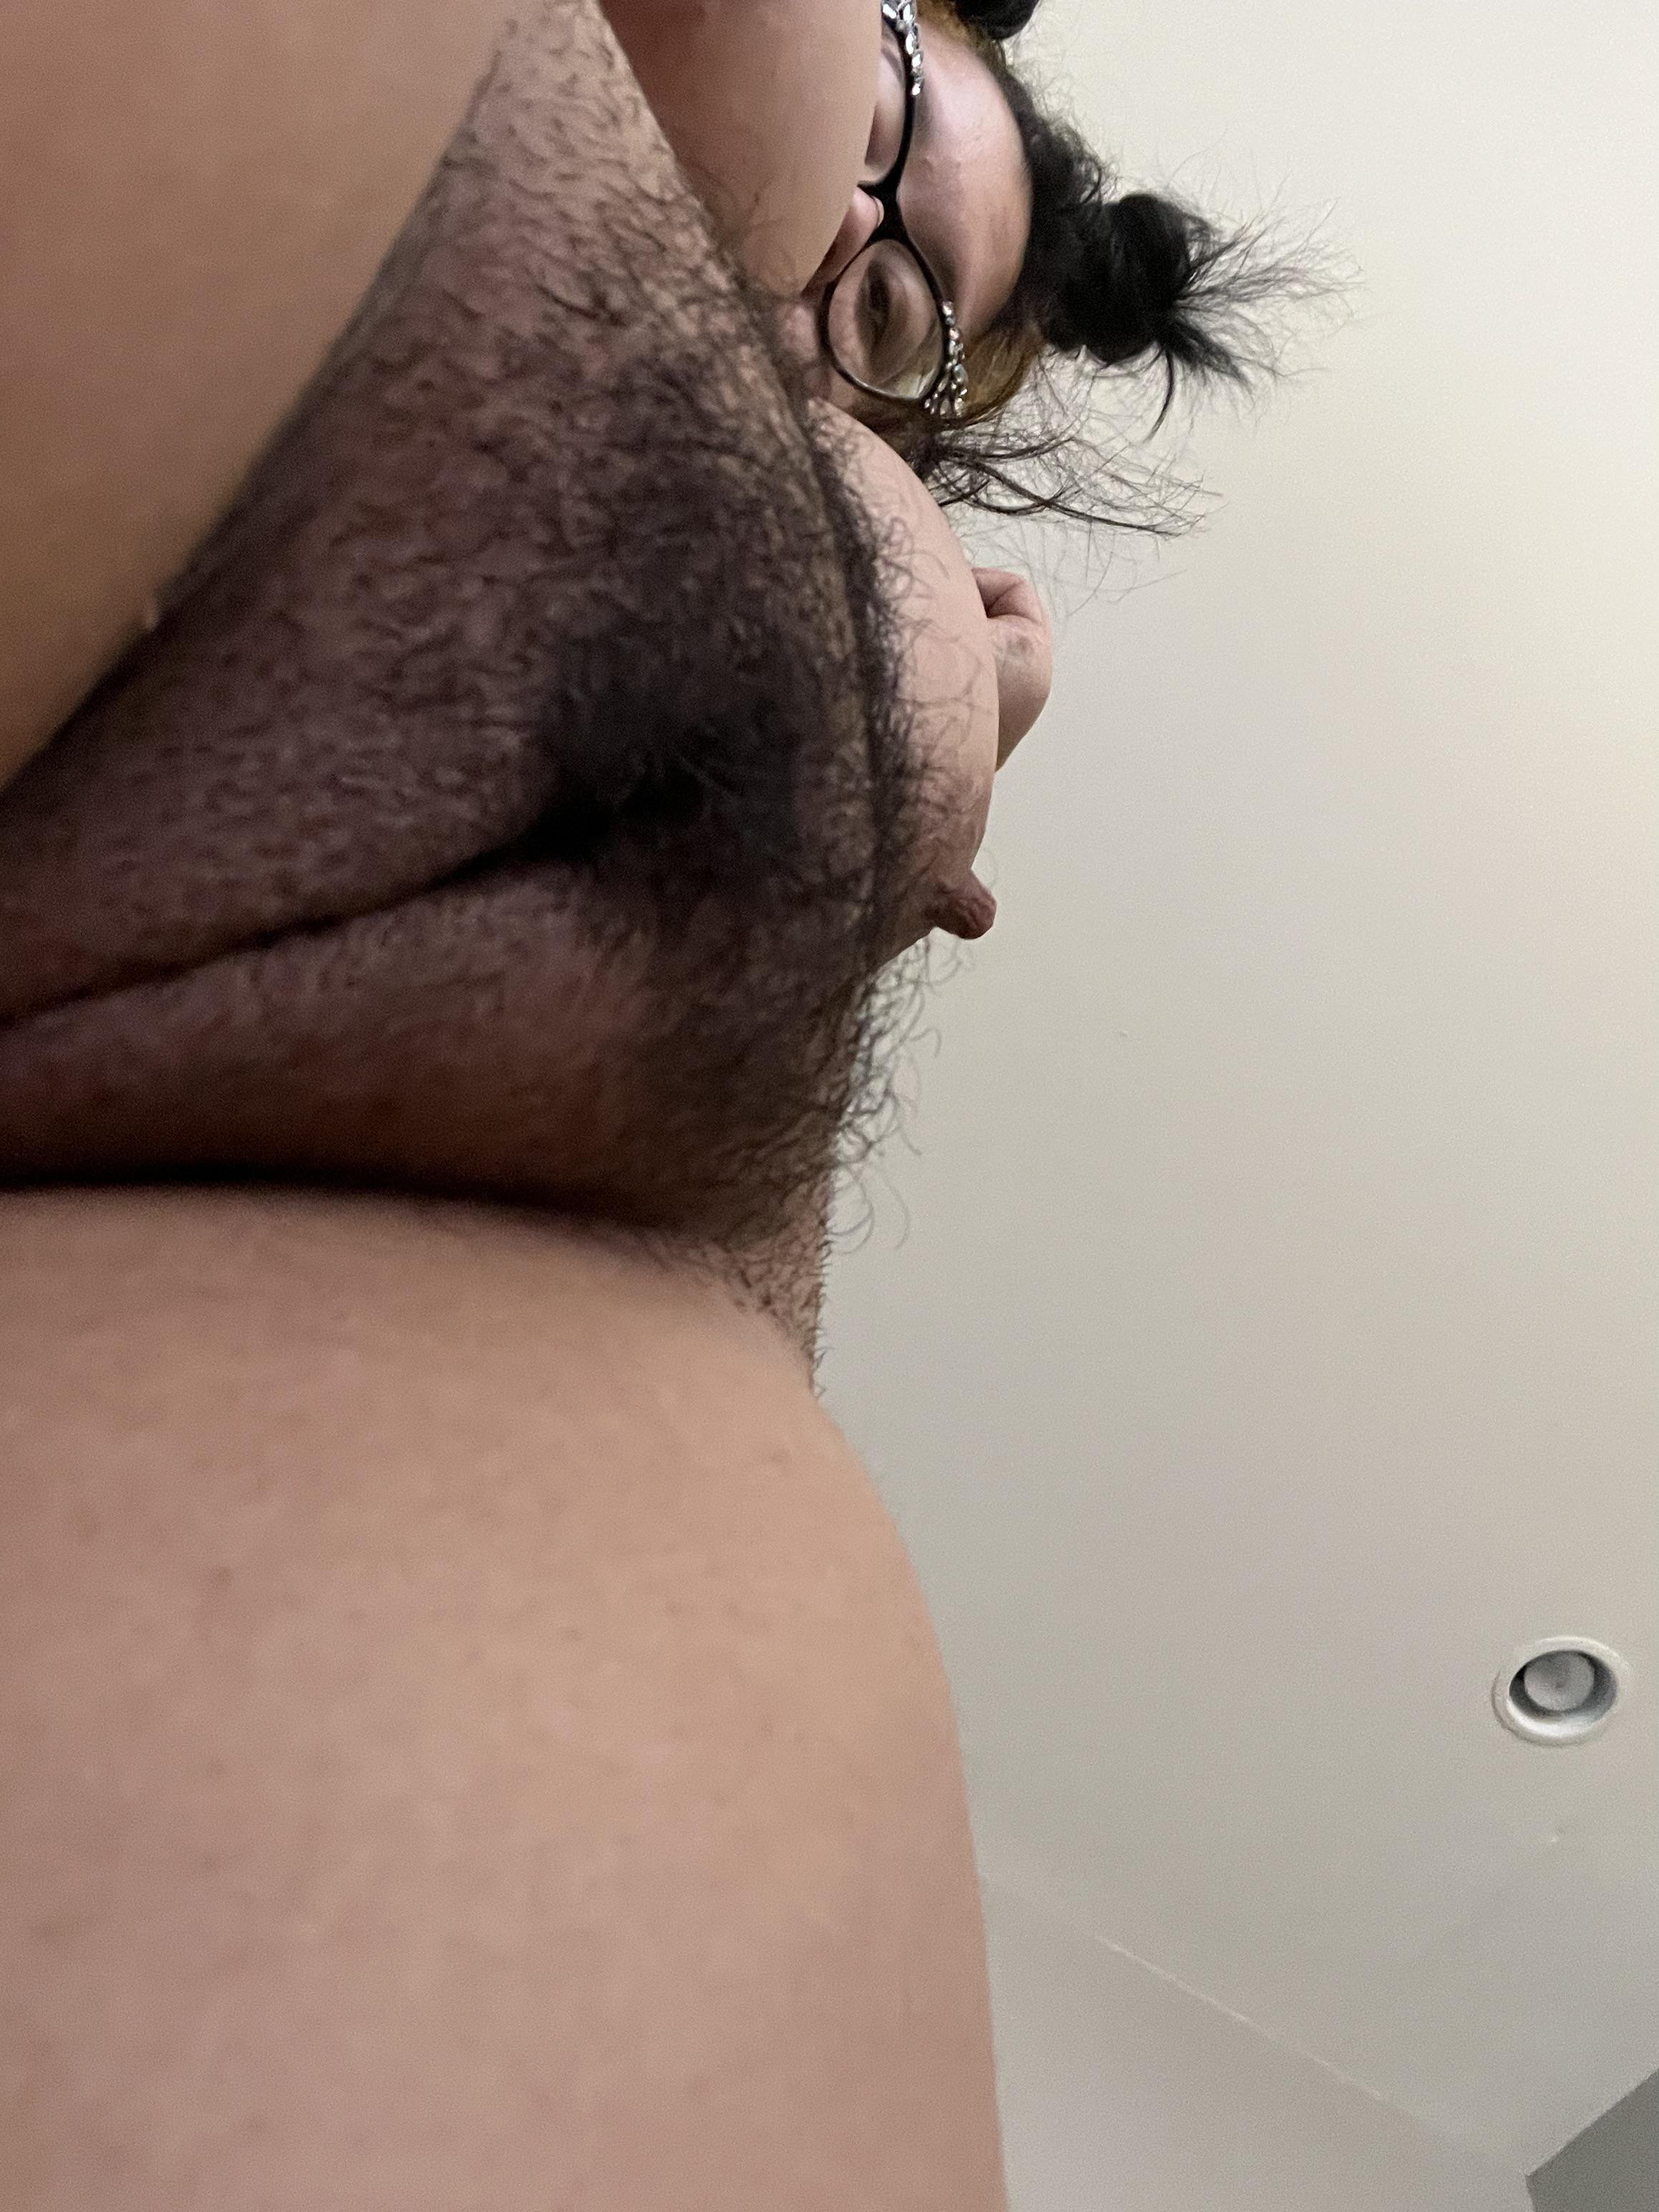 Hairy and image